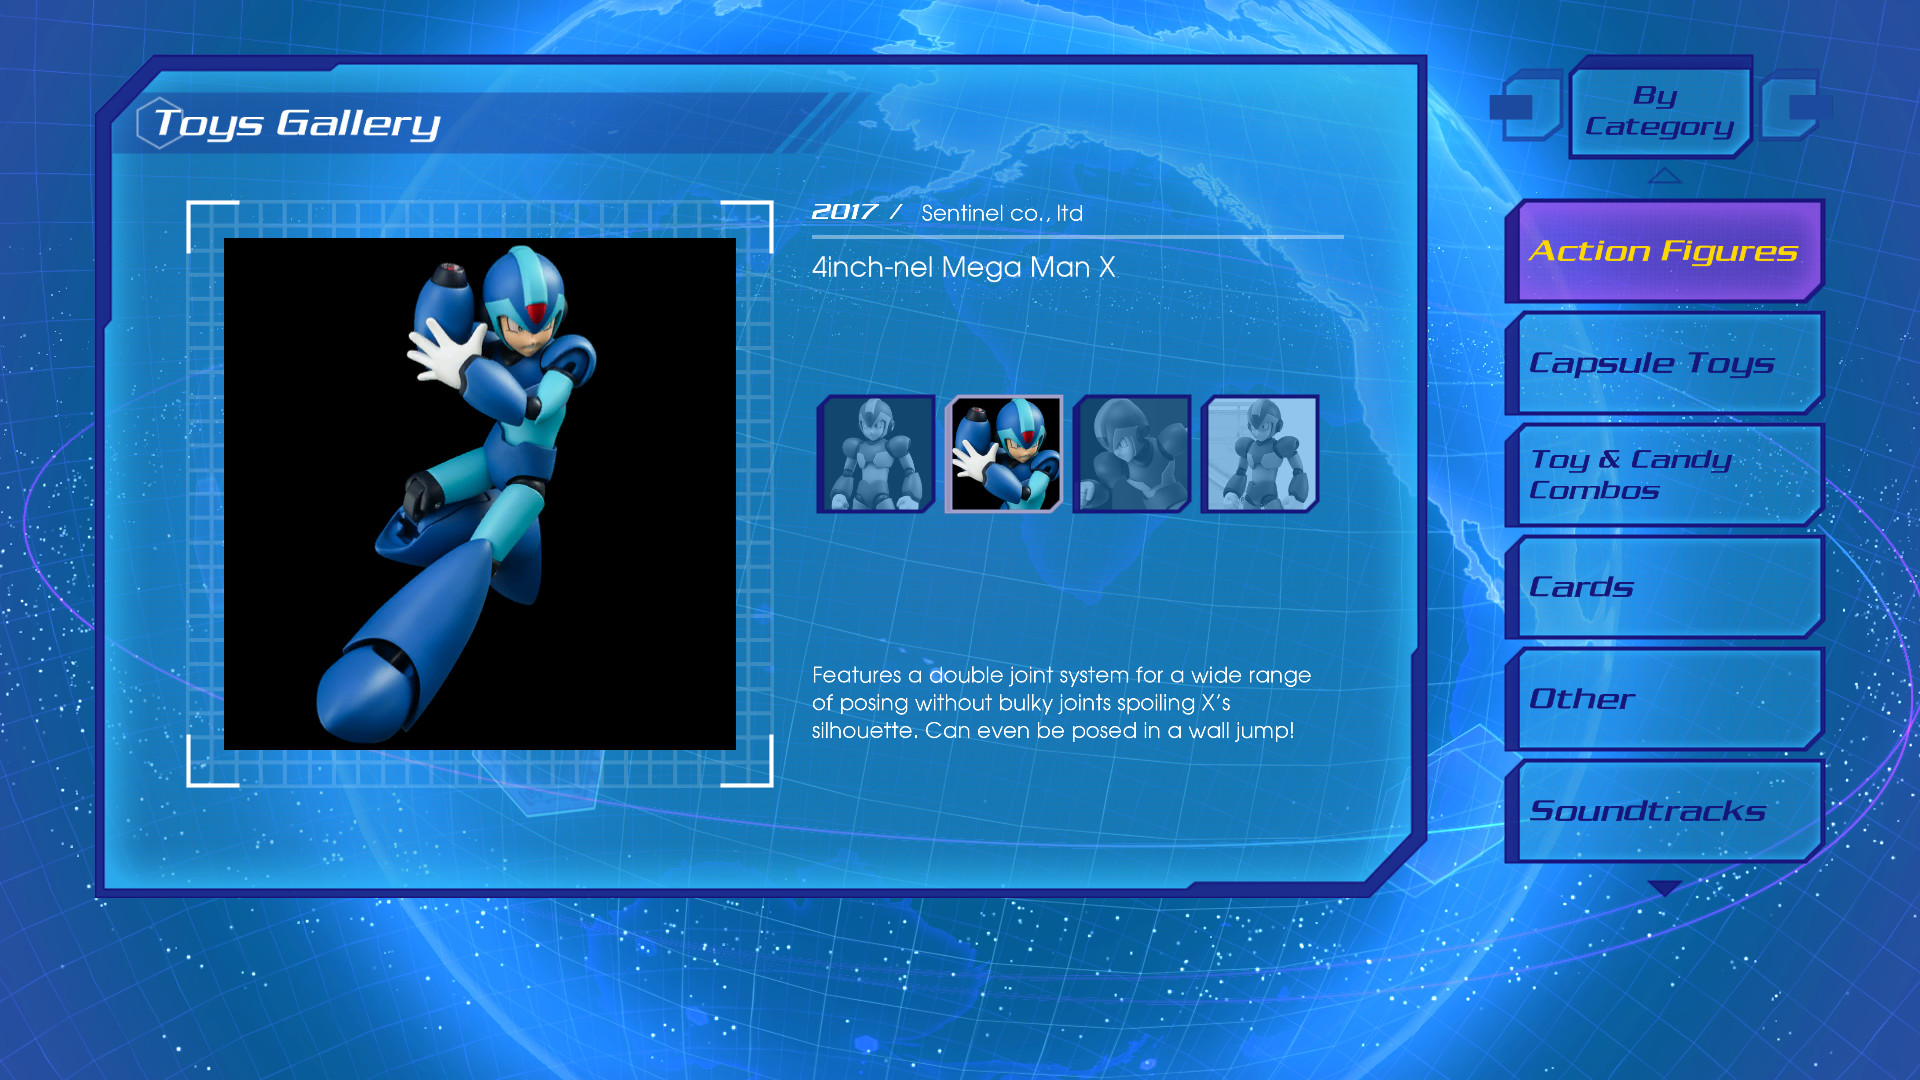 Mega Man X Legacy Collection / ROCKMAN X ANNIVERSARY COLLECTION image